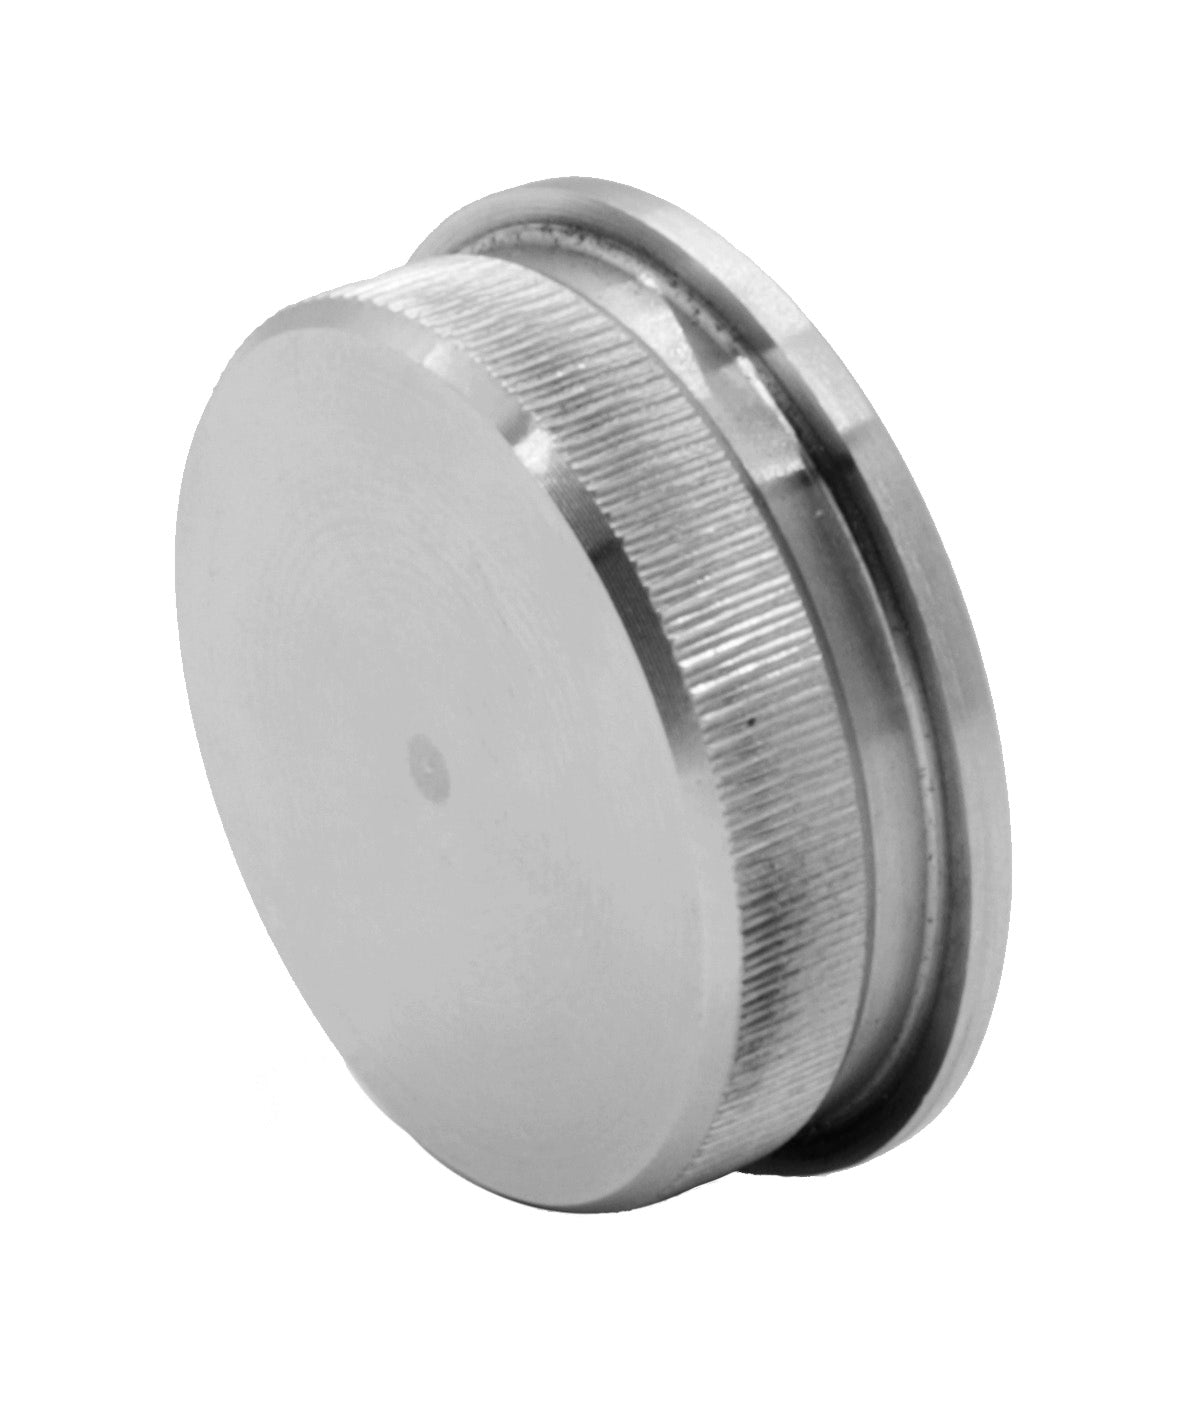 Stainless Steel Round End Cap Cover for 1 1/2" OD Round Tube on Cable Railing Deck Posts & Top Rail (P0330-150) - SHEMONICO